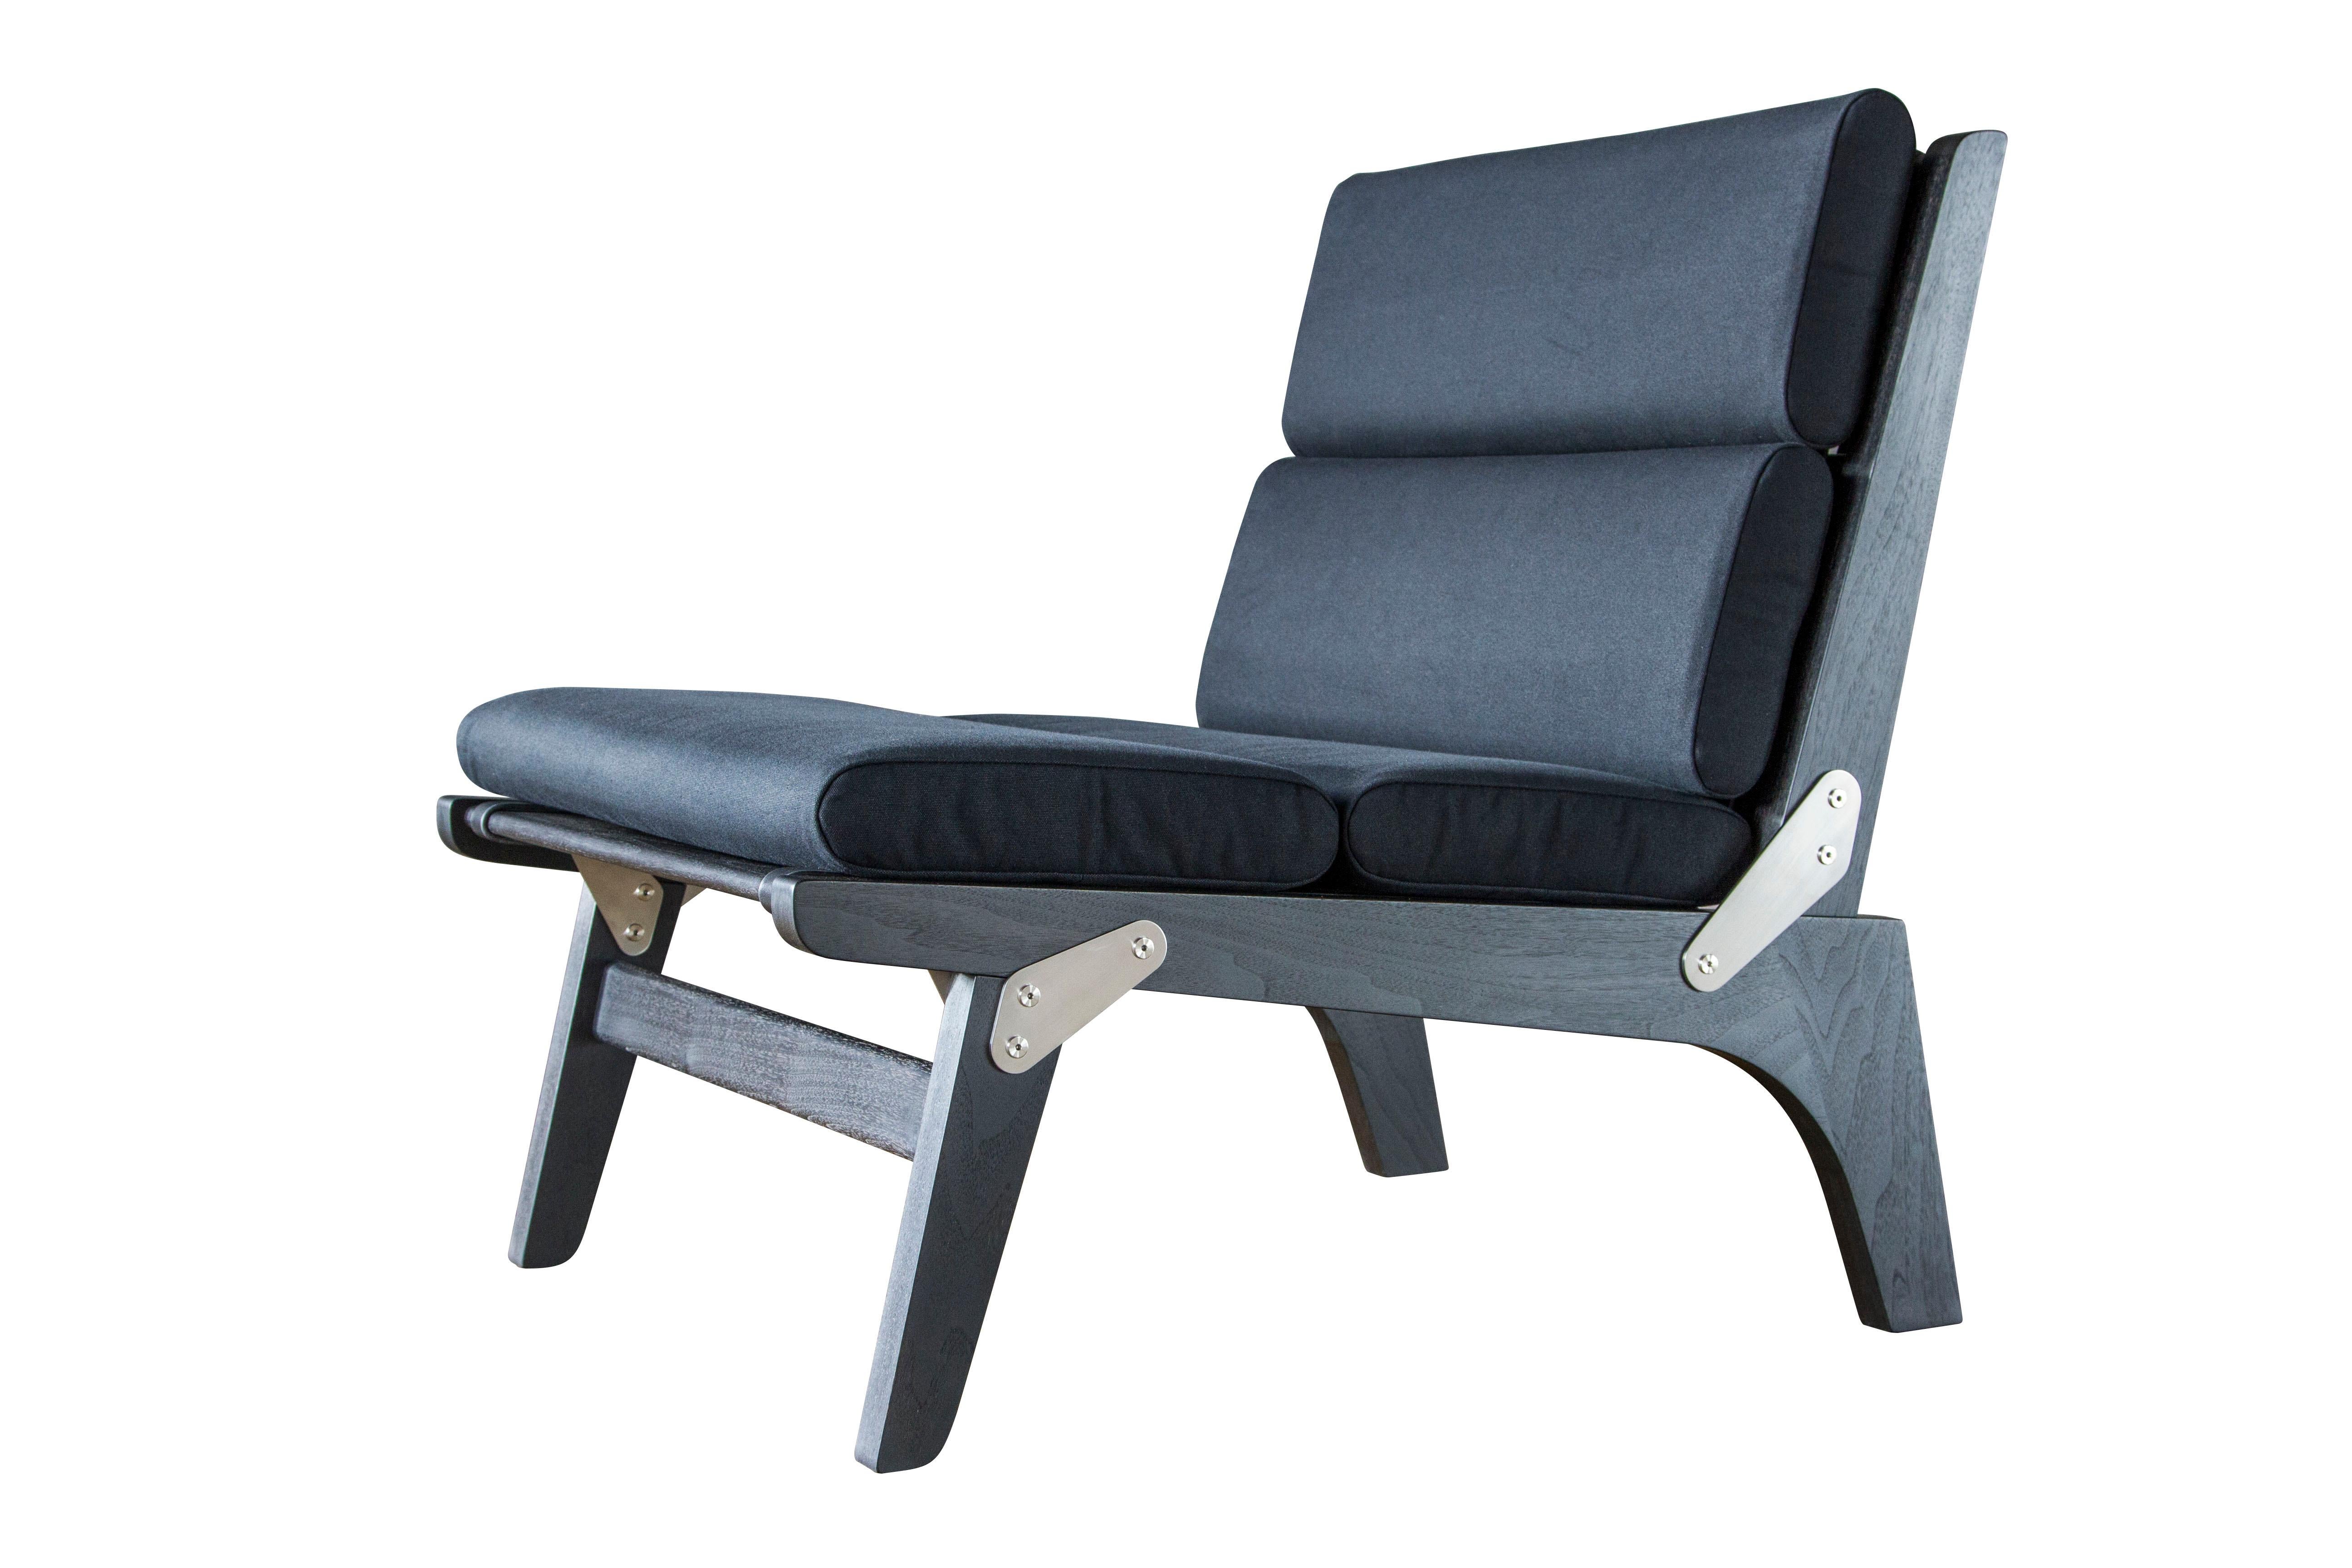 The Officer's Field Set lounge chair shown here as the non-folding version in ebonized walnut, black canvas, English bridle leather strapping and brushed stainless steel hardware. 

The modern campaign collection by Richard Wrightman combines the